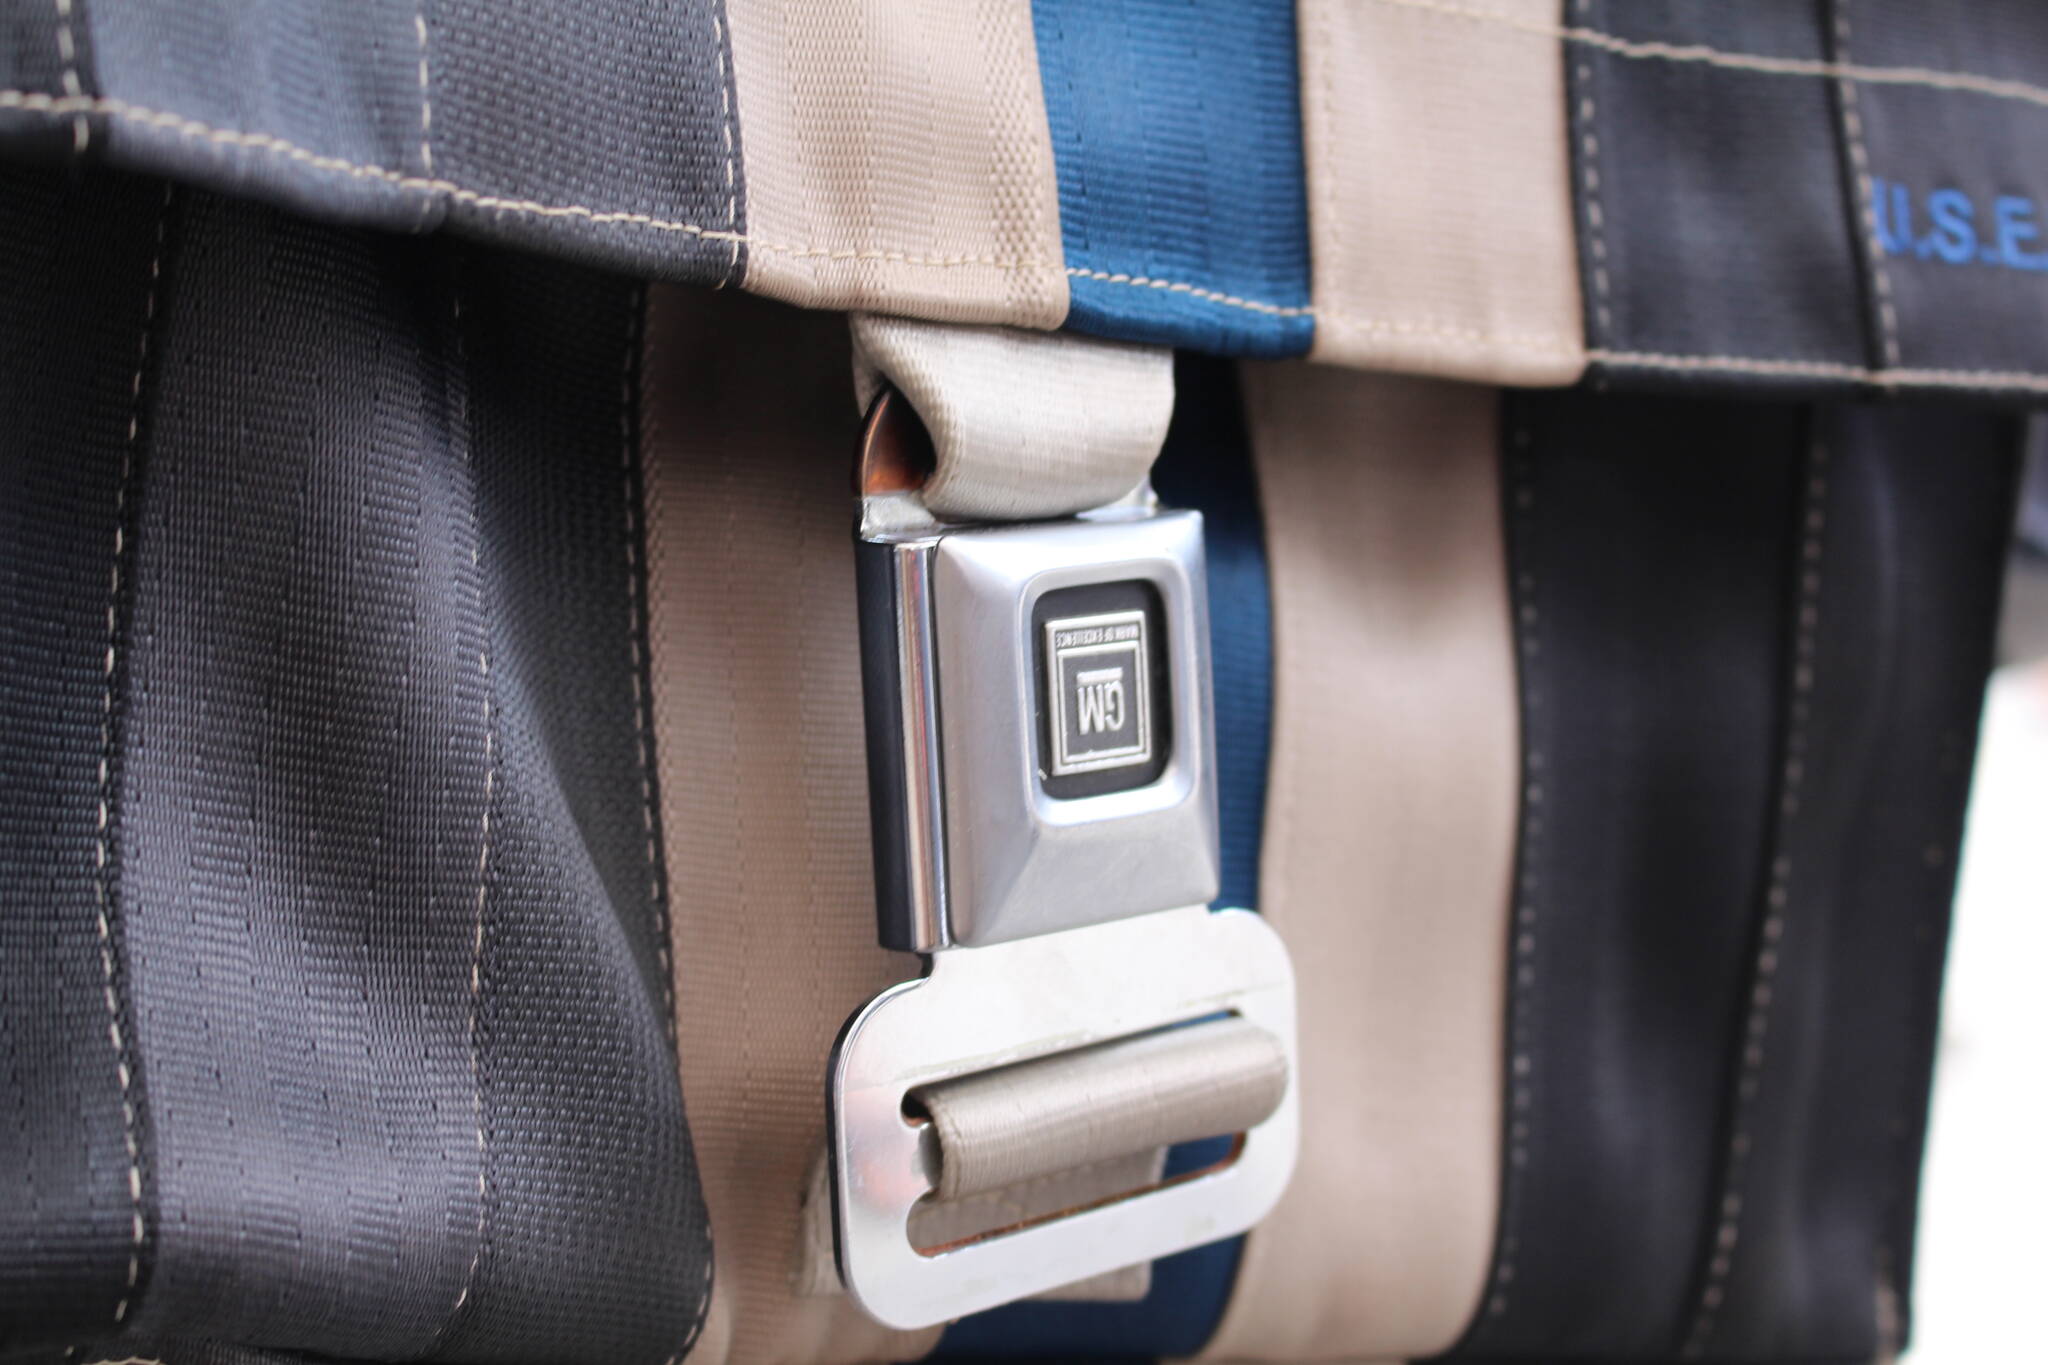 A recycled GM seatbelt buckle gets a new use as a bag latch for one of Kehlers bags. (Zachary Delaney/Revelstoke Review)